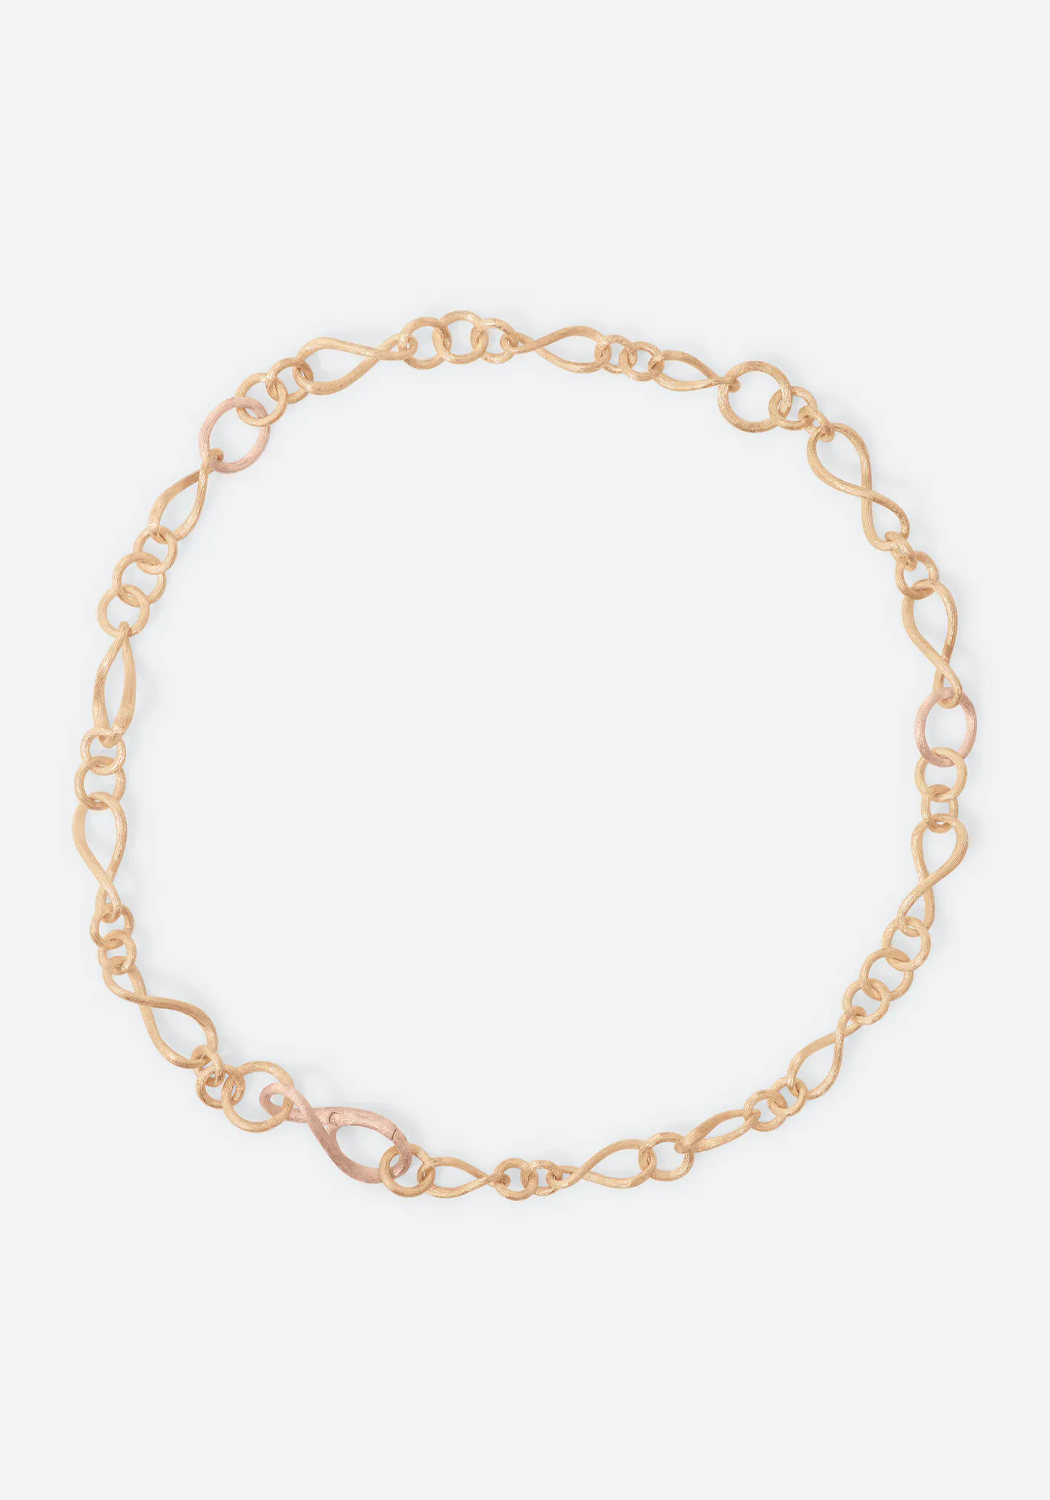 Ole Lynggaard Love 18KYRG Small Chain Link Collier Necklac | Ref. A1730-406 | OsterJewelers.com